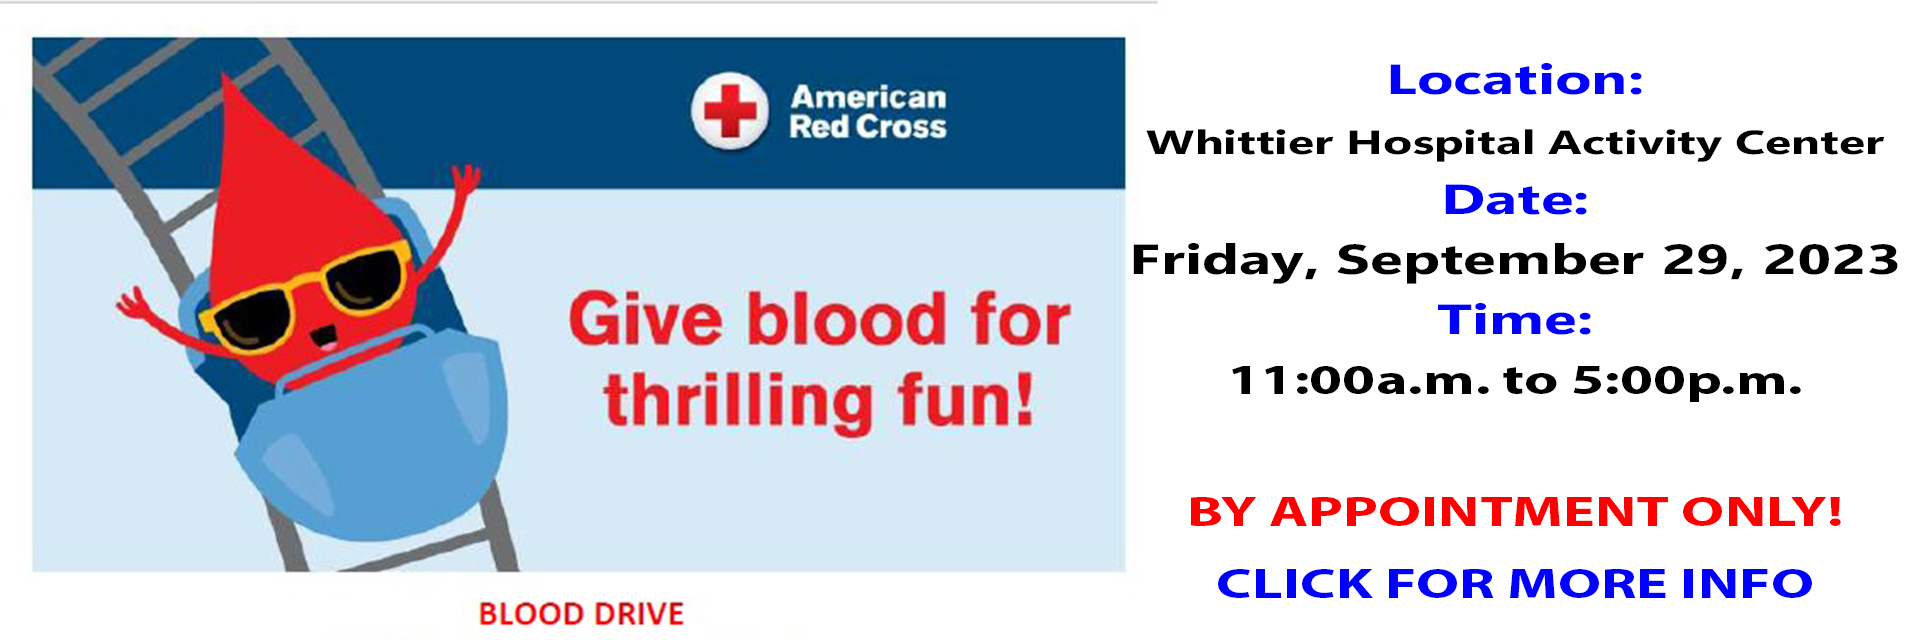 Poster Informing Public of Blood Drive to be held at Whittier Hospital 9-29-2023